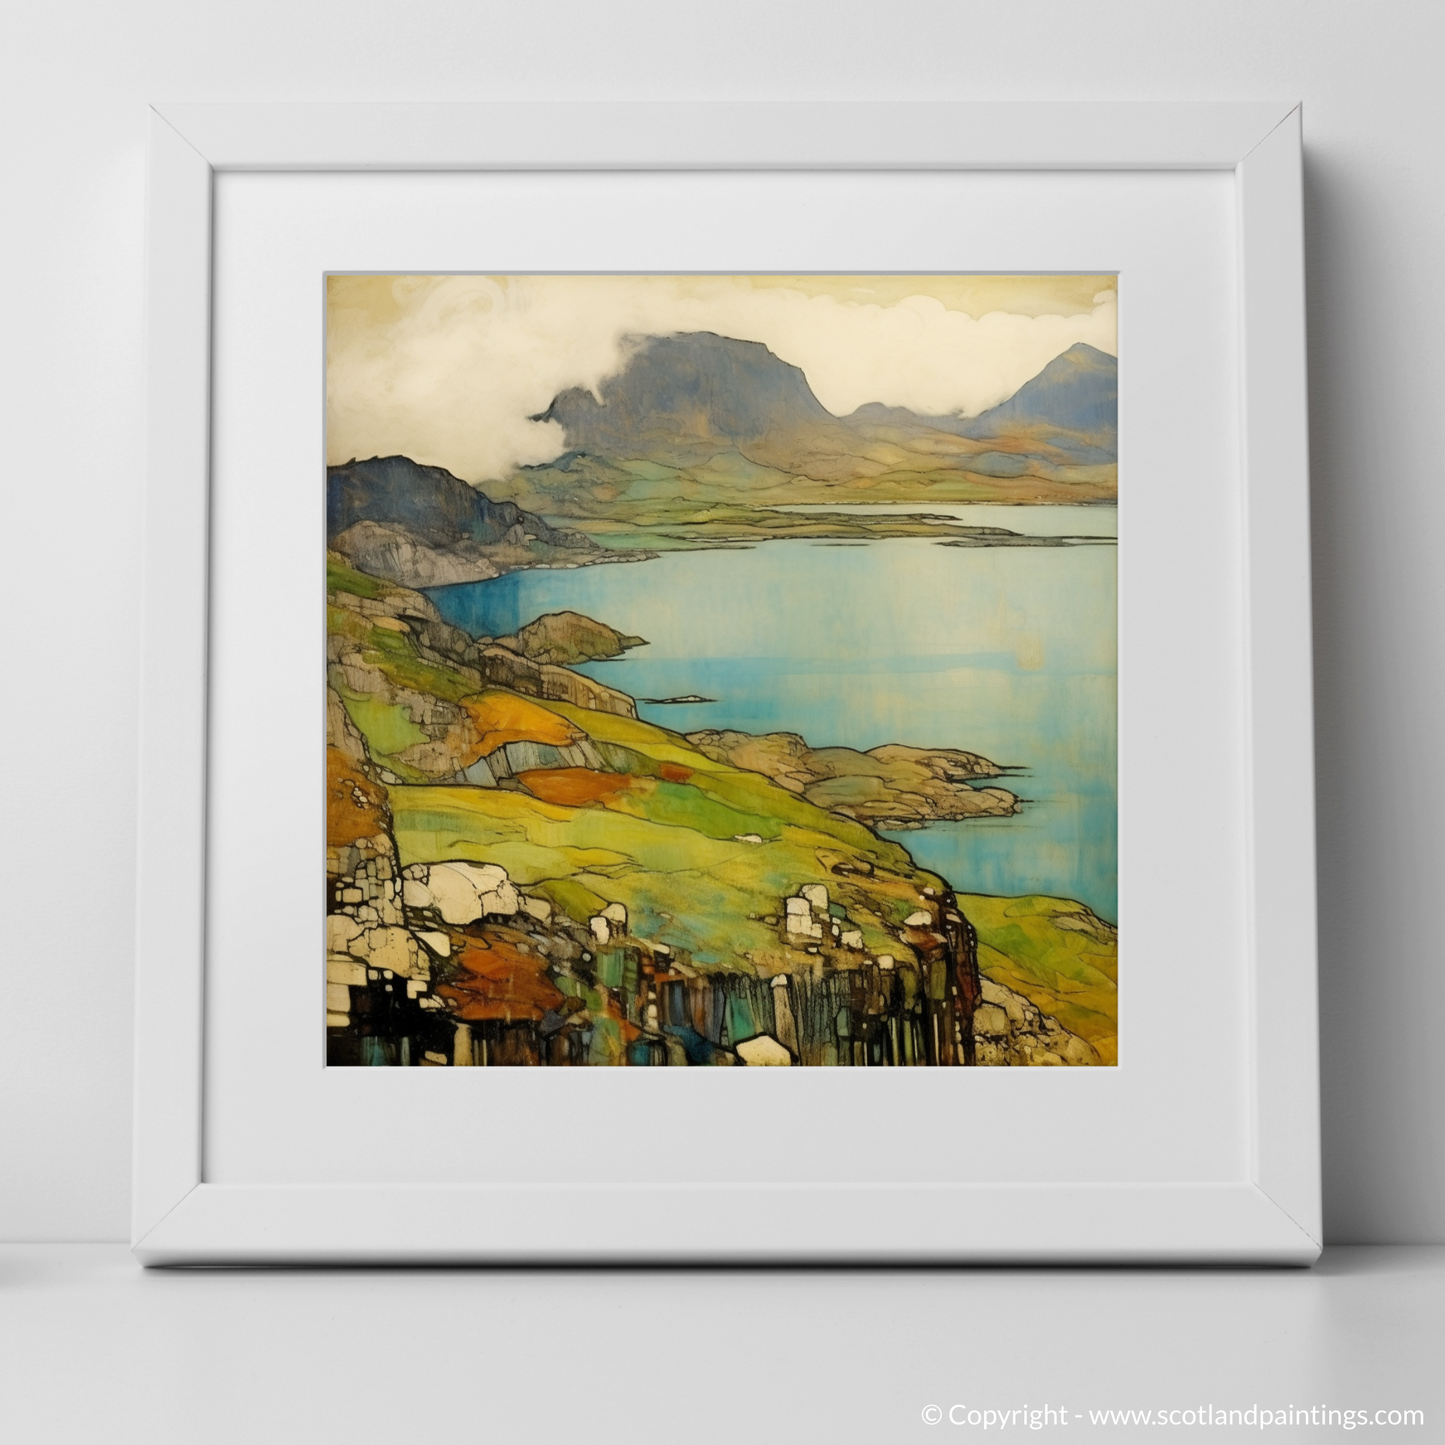 Isle of Raasay: An Art Nouveau Ode to the Inner Hebrides